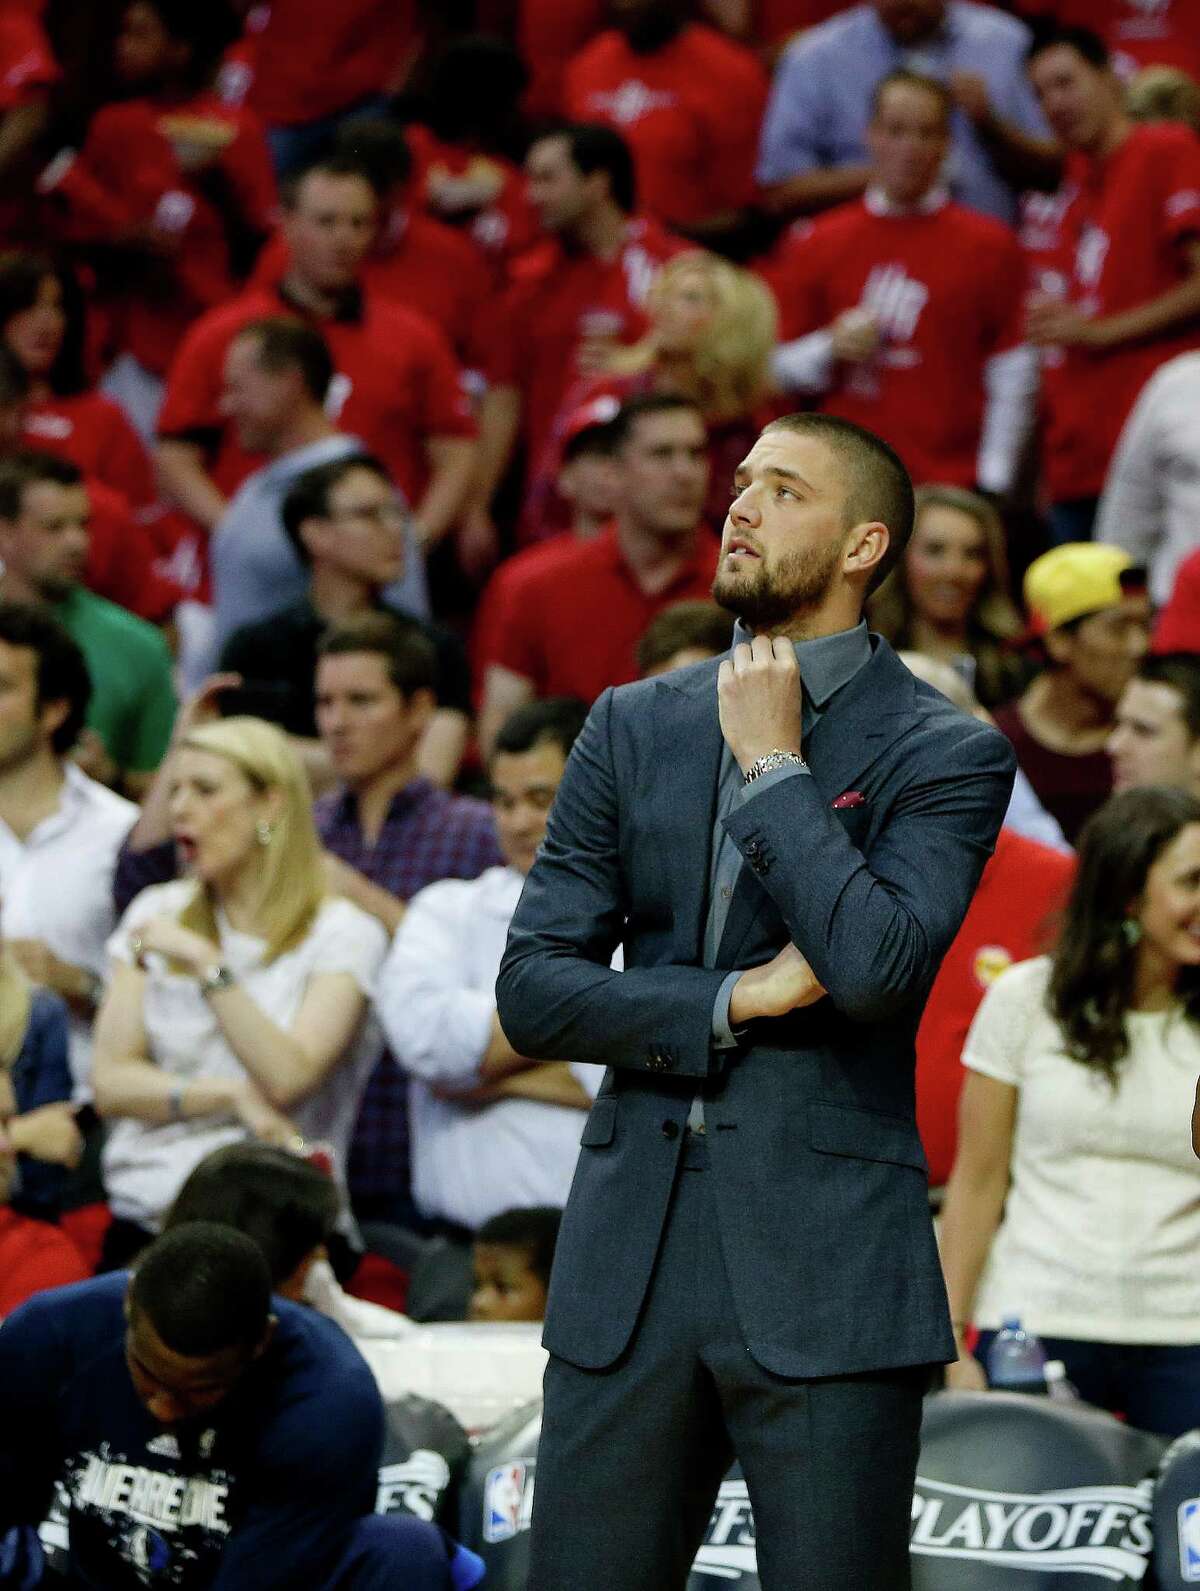 Chandler Parsons was stylish in his suit Tuesday night, but it's not the type of outfit he would prefer to wear this time of year.